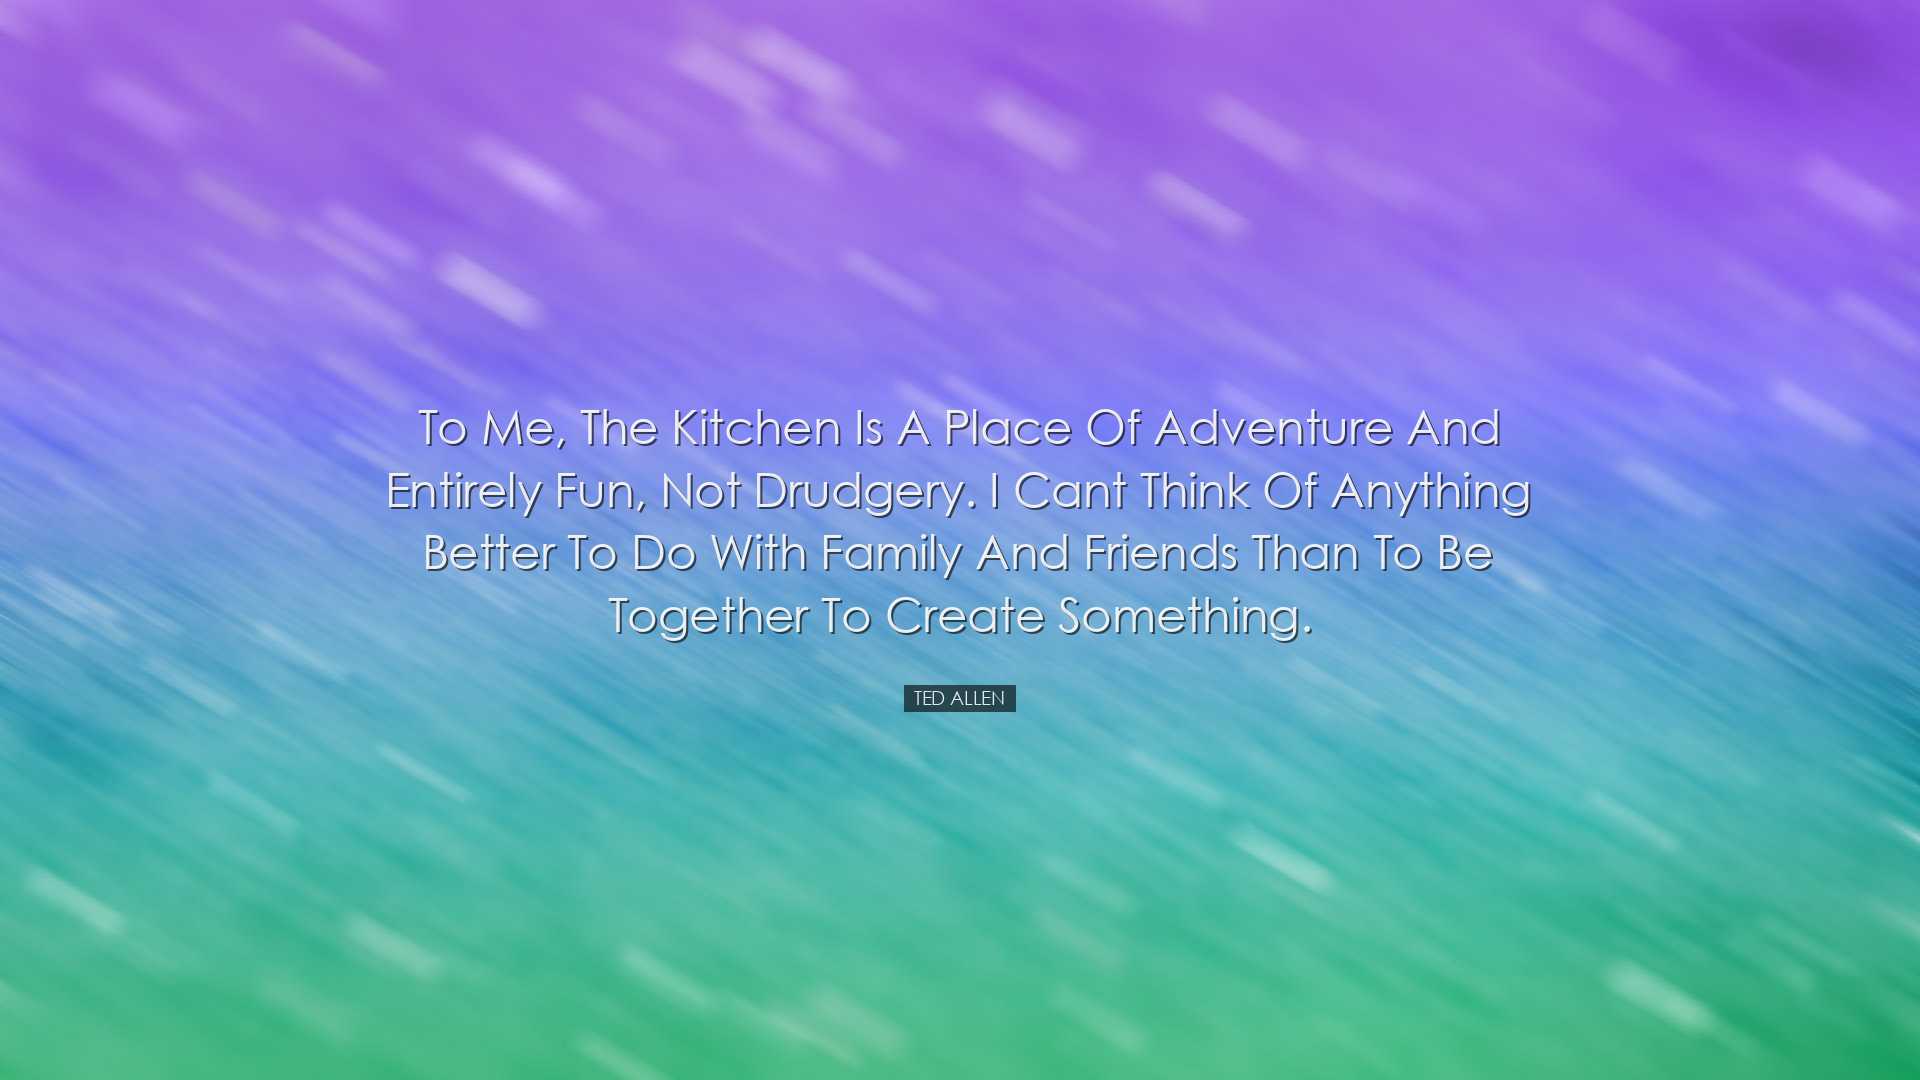 To me, the kitchen is a place of adventure and entirely fun, not d